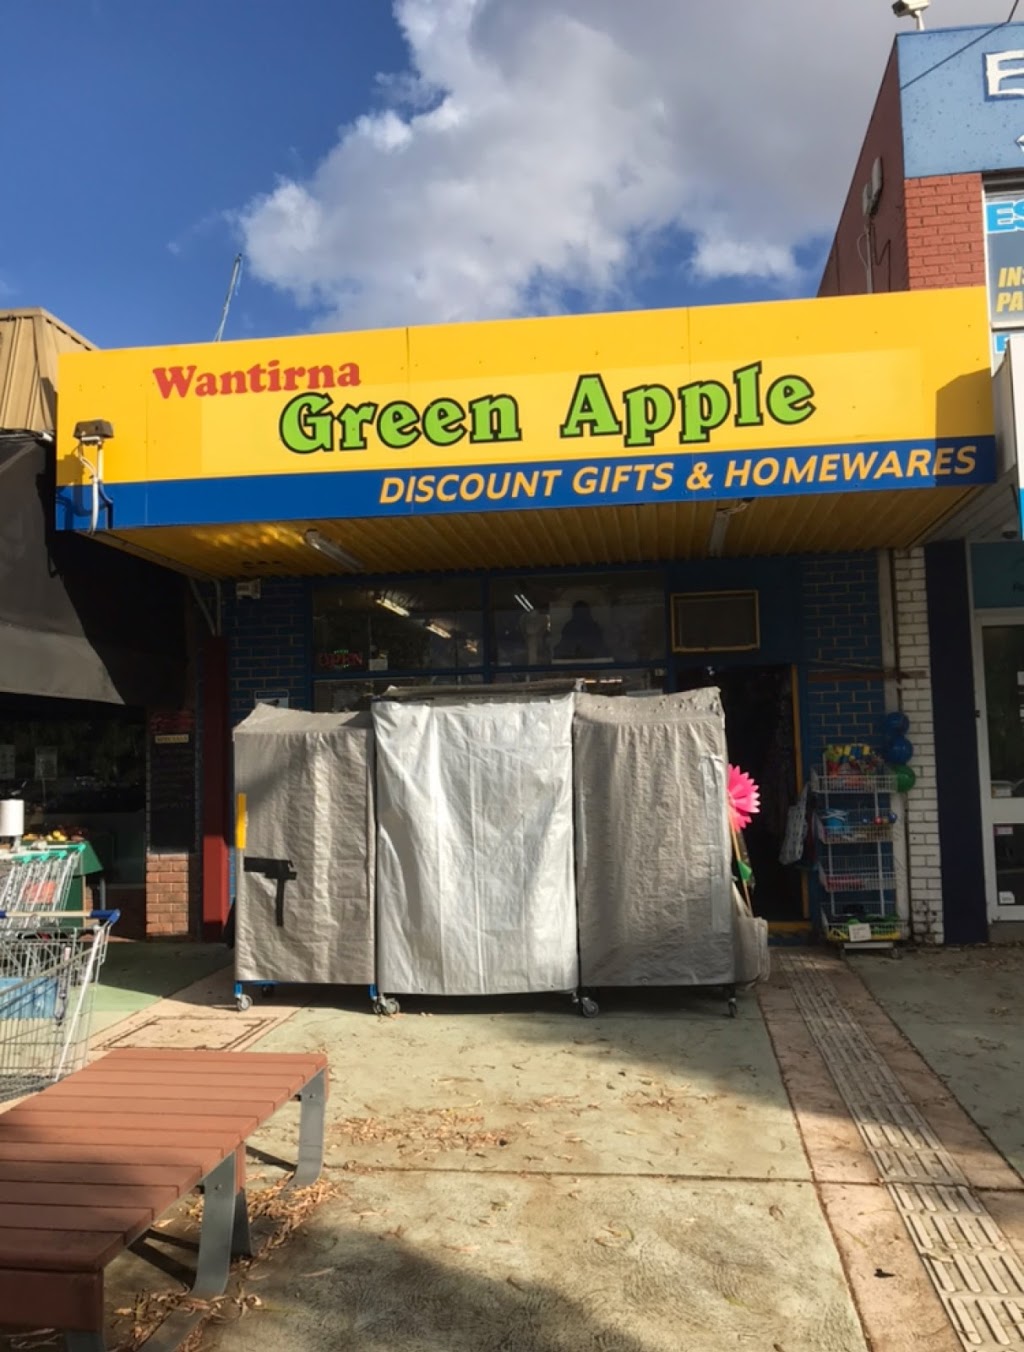 GREEN APPLE Variety store | store | 14 The Mall, Wantirna VIC 3152, Australia